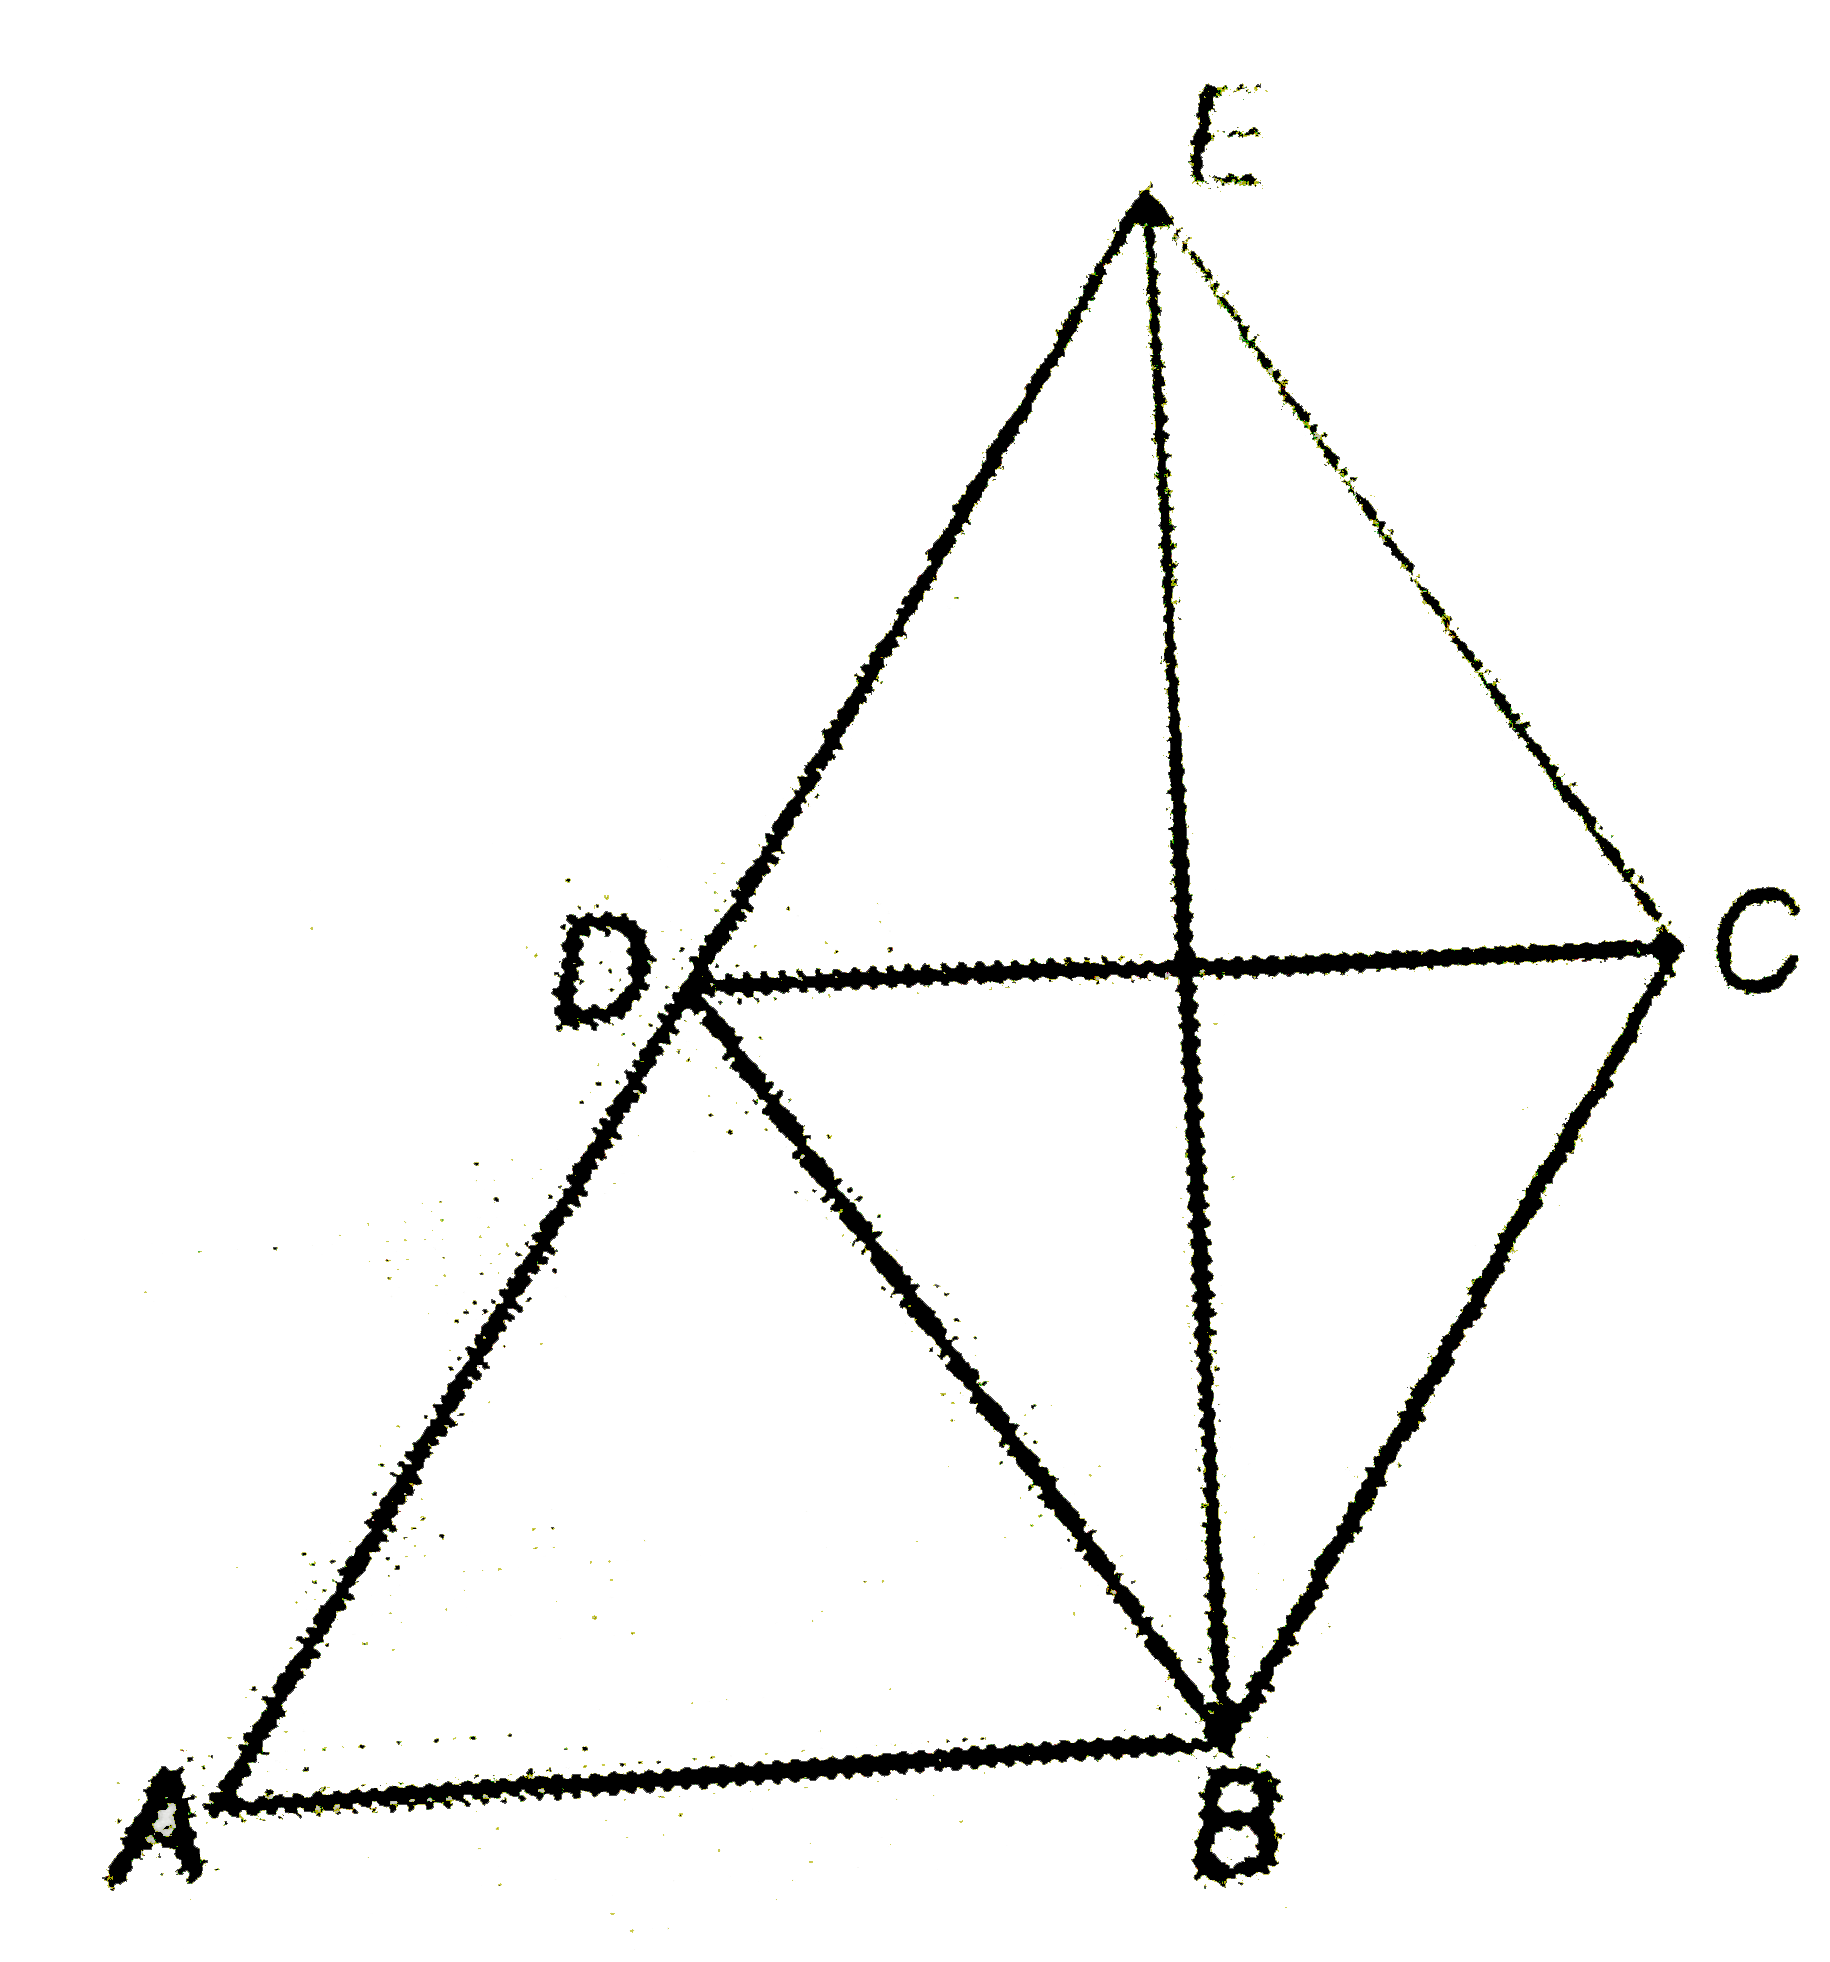 In the given figure, ABCD is a rohombus with A=67^(@). If DEC is an equilateral triangle, calculate   (i) angleCBE   (ii) angleDBE